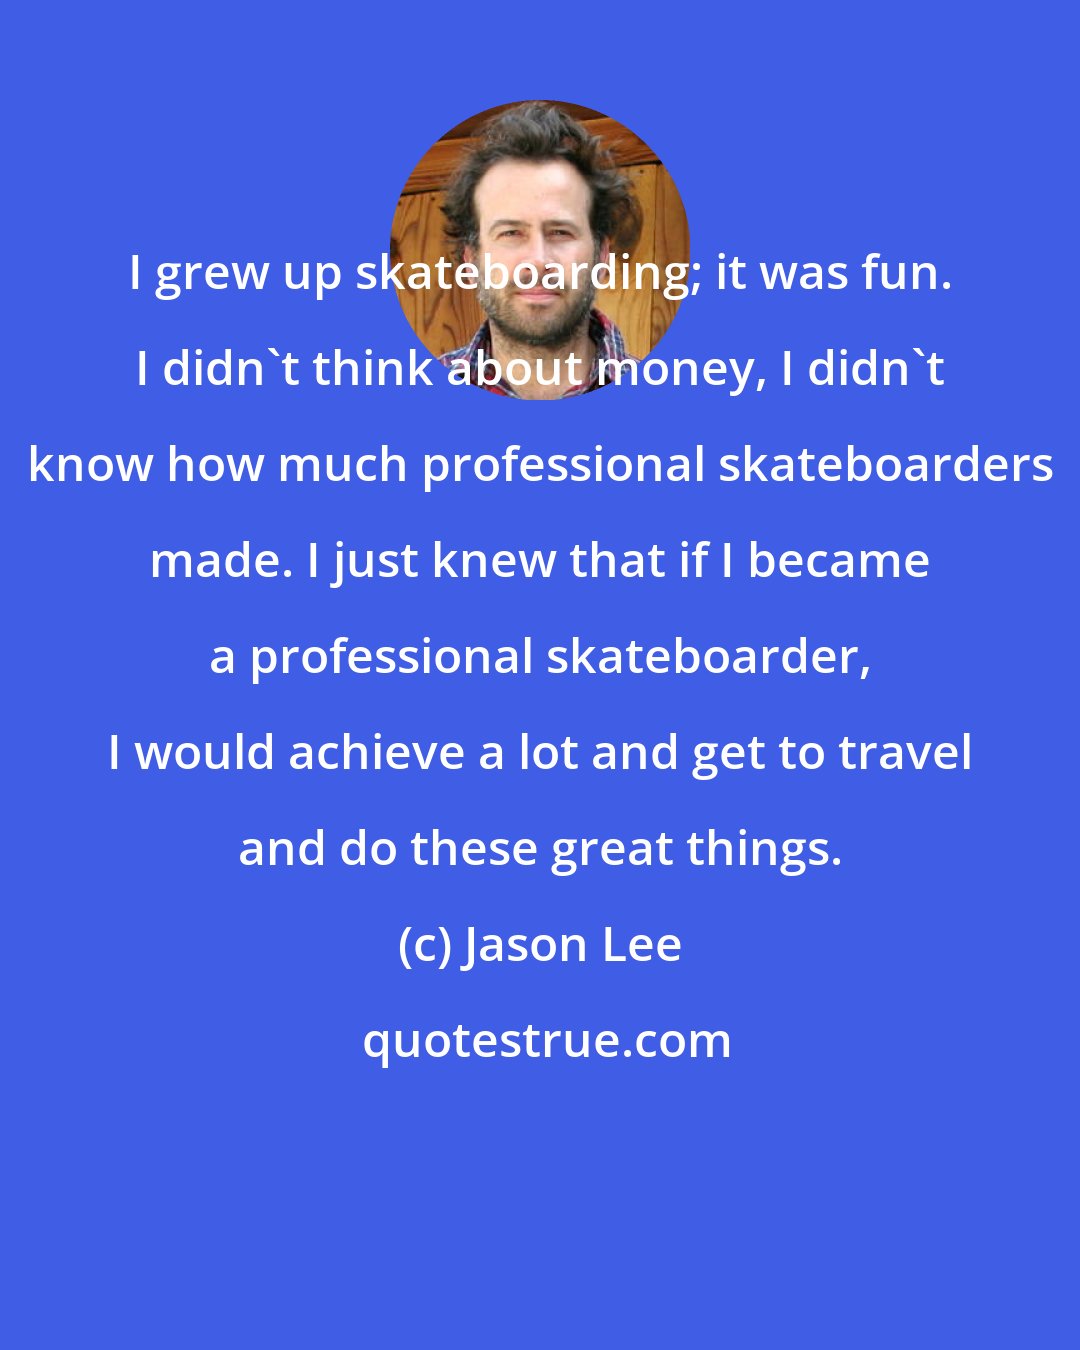 Jason Lee: I grew up skateboarding; it was fun. I didn't think about money, I didn't know how much professional skateboarders made. I just knew that if I became a professional skateboarder, I would achieve a lot and get to travel and do these great things.